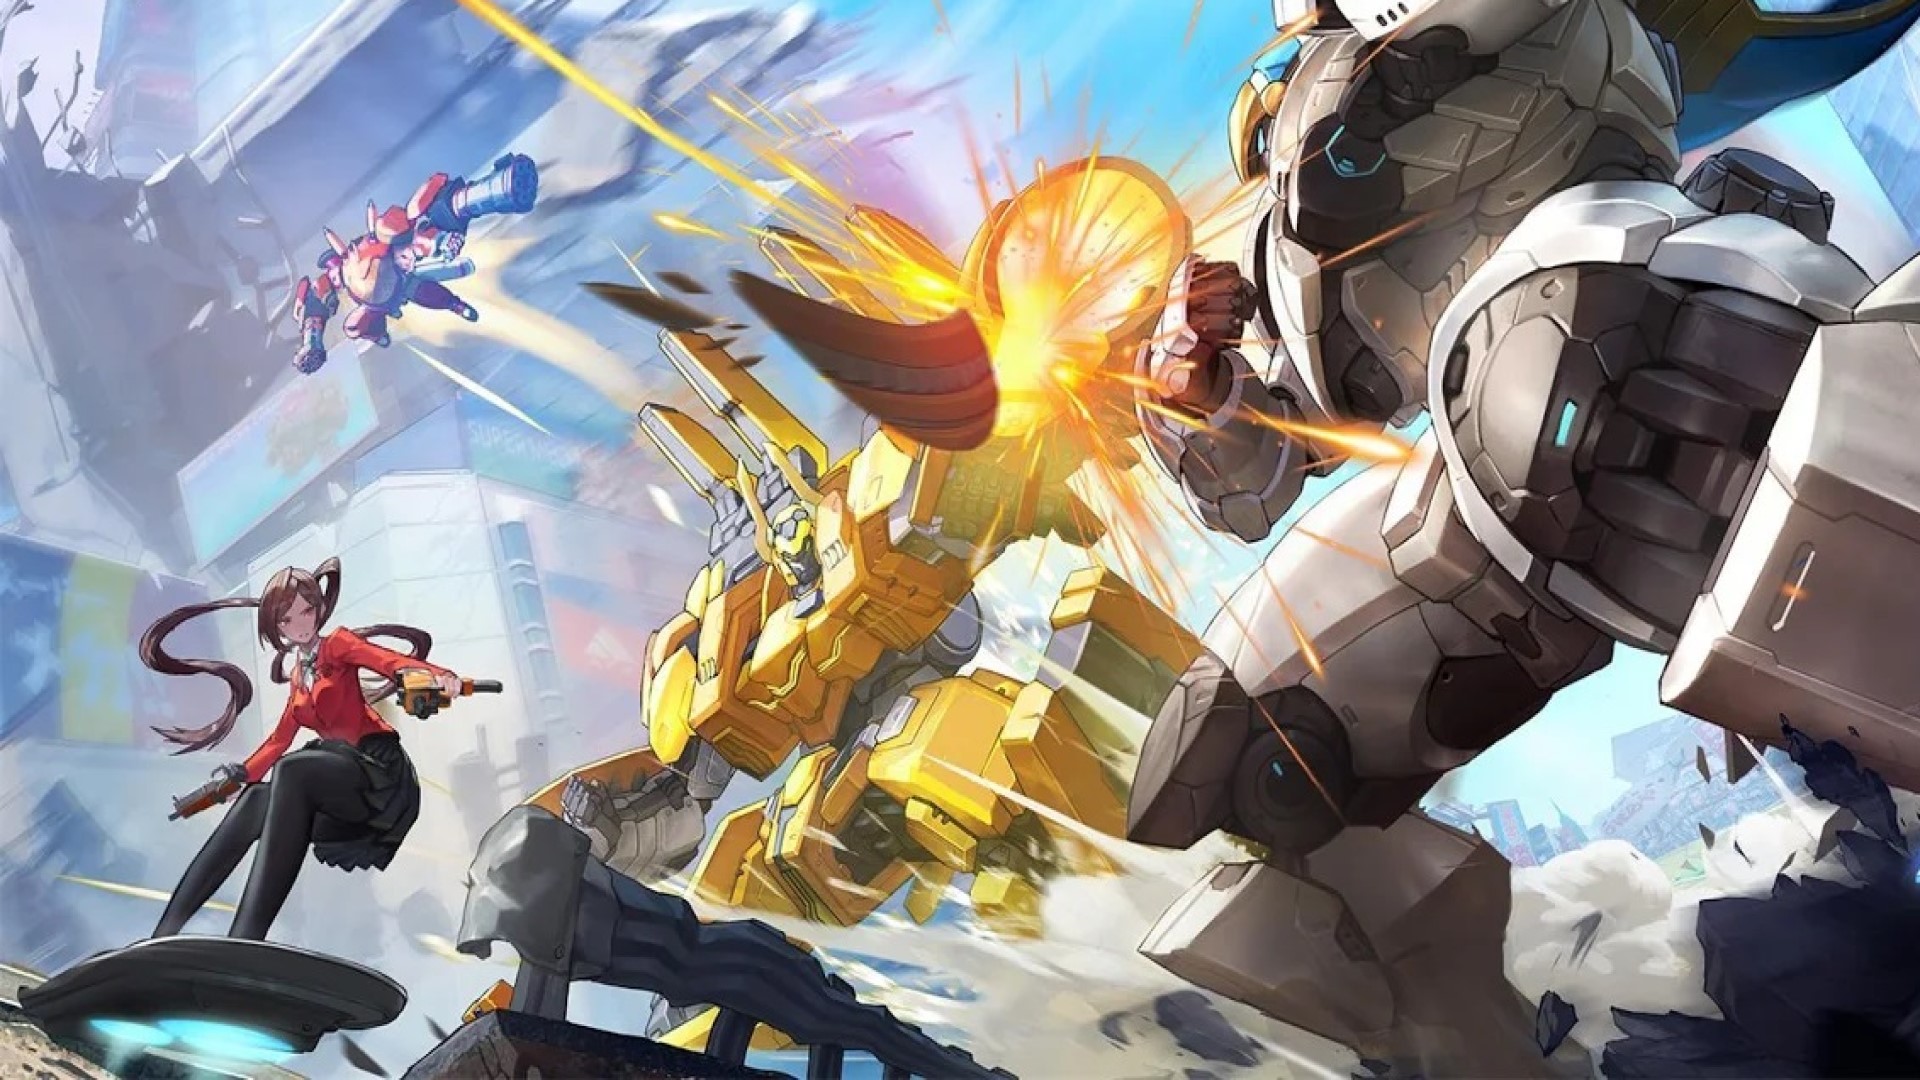 Super Mecha Champions is running a crossover event with popular anime